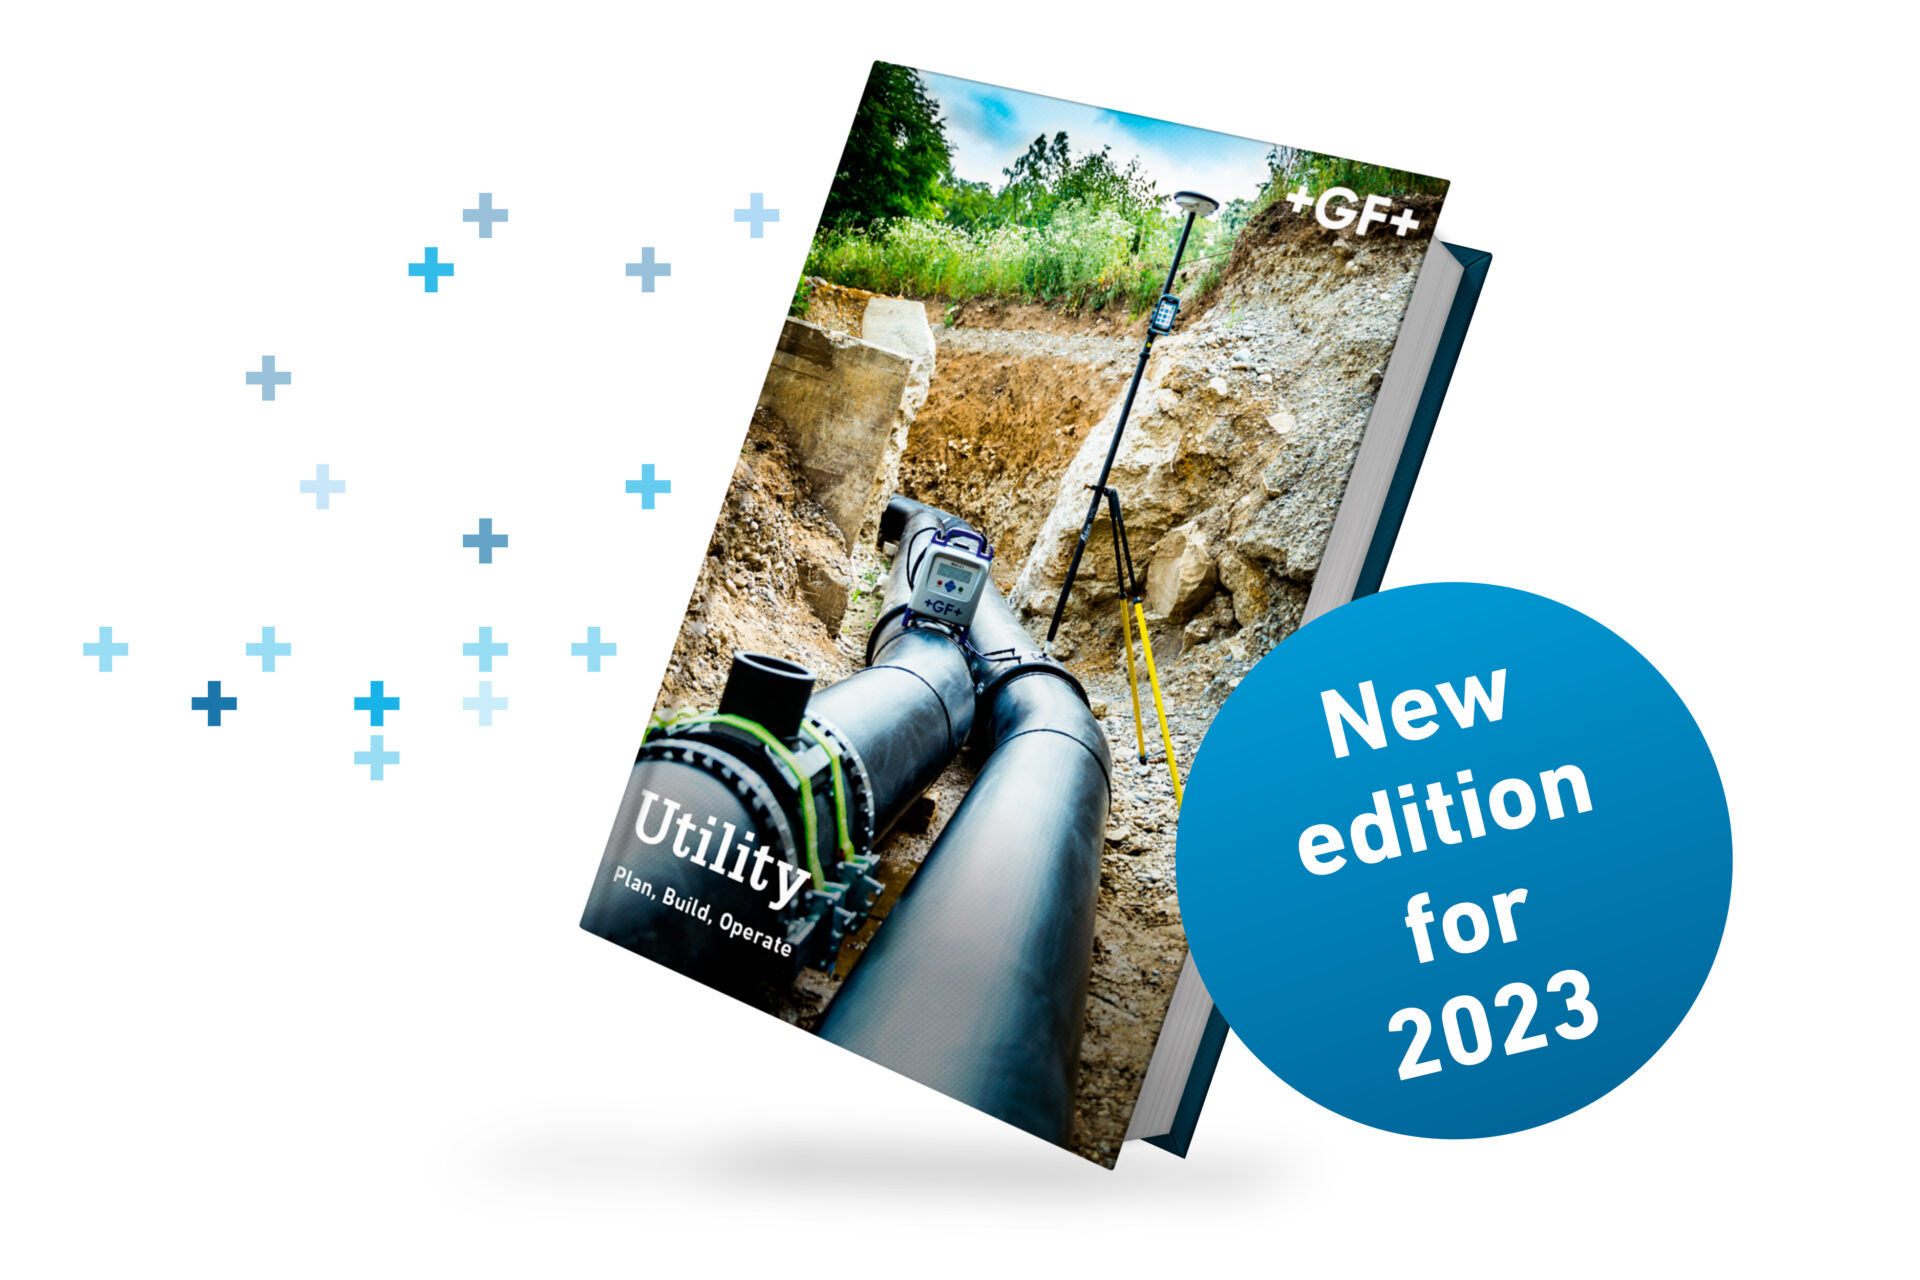 Plan. Build. Operate. – GF Piping Systems Publishes its Updated Planning Fundamentals for Utilities 